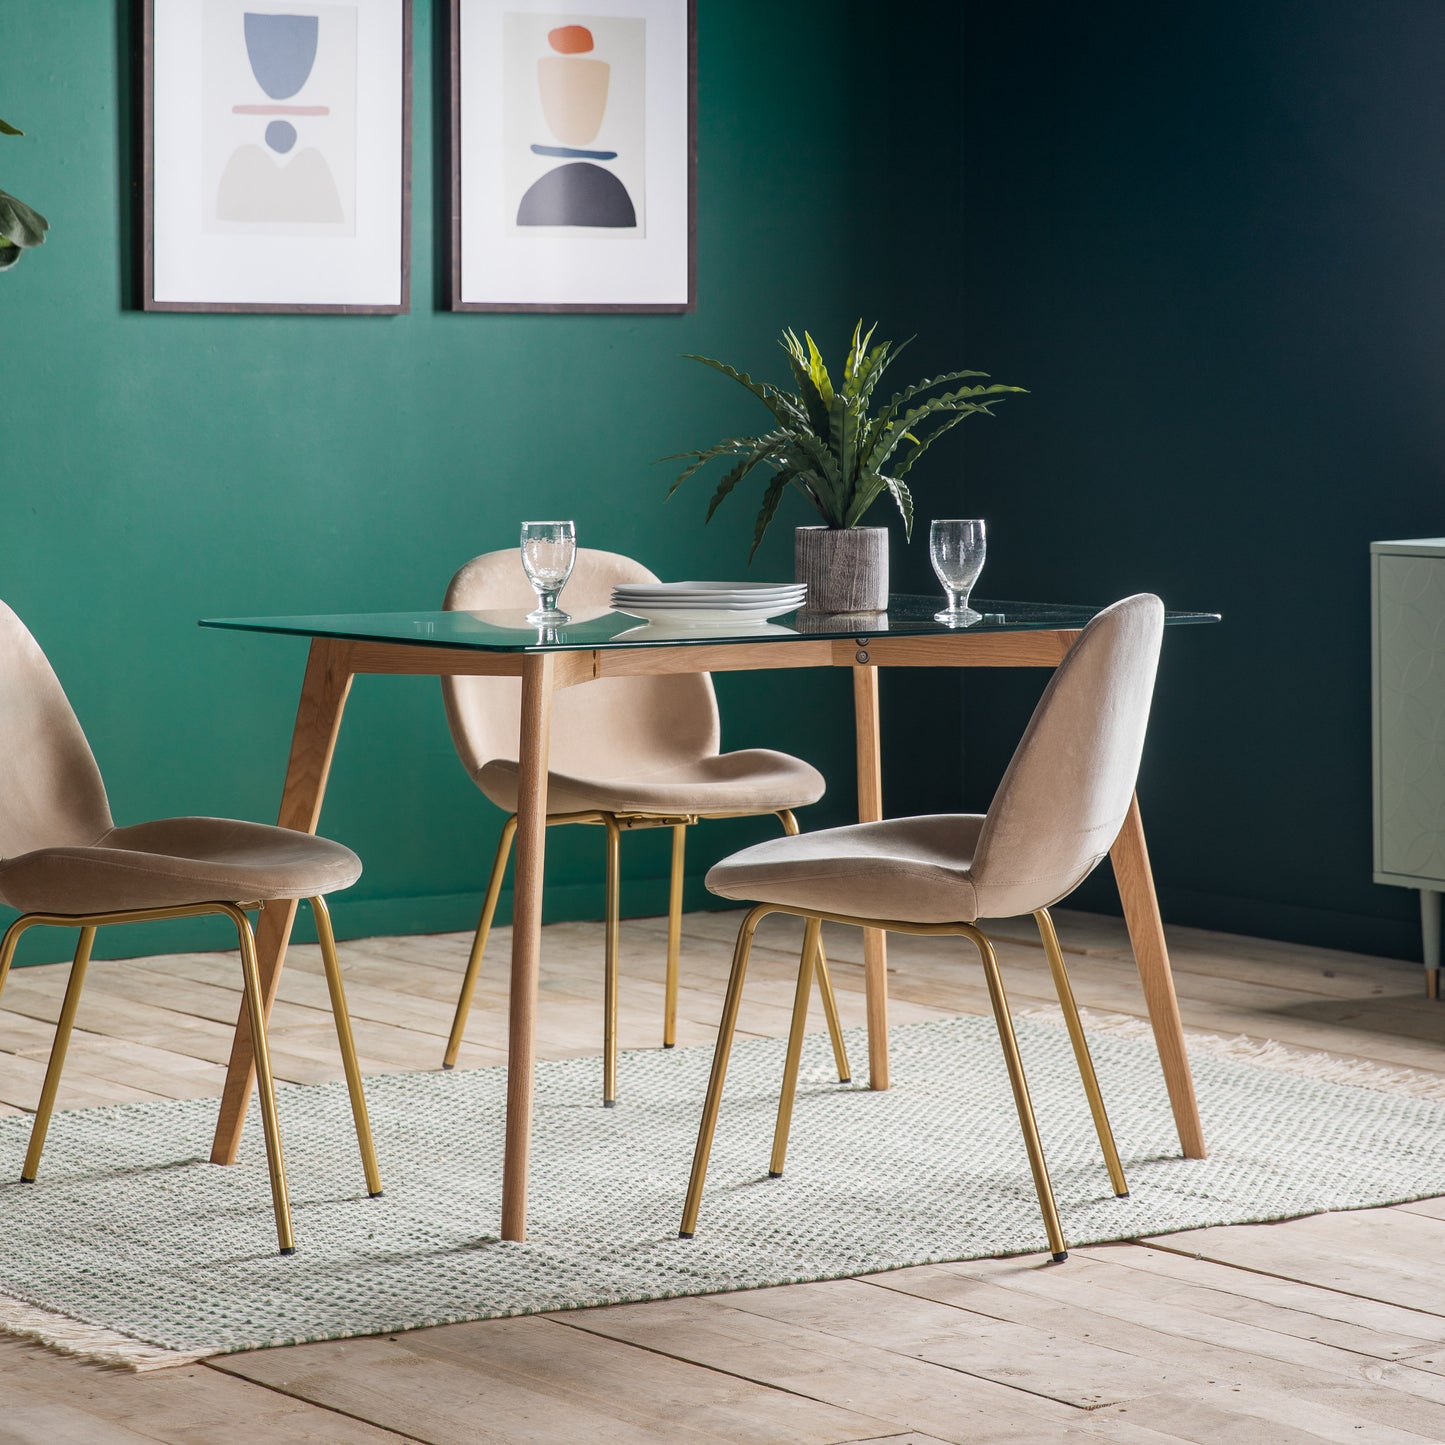 An Oak dining table and chairs, perfect for home furniture and interior decor, in a room with green walls from Kikiathome.co.uk.